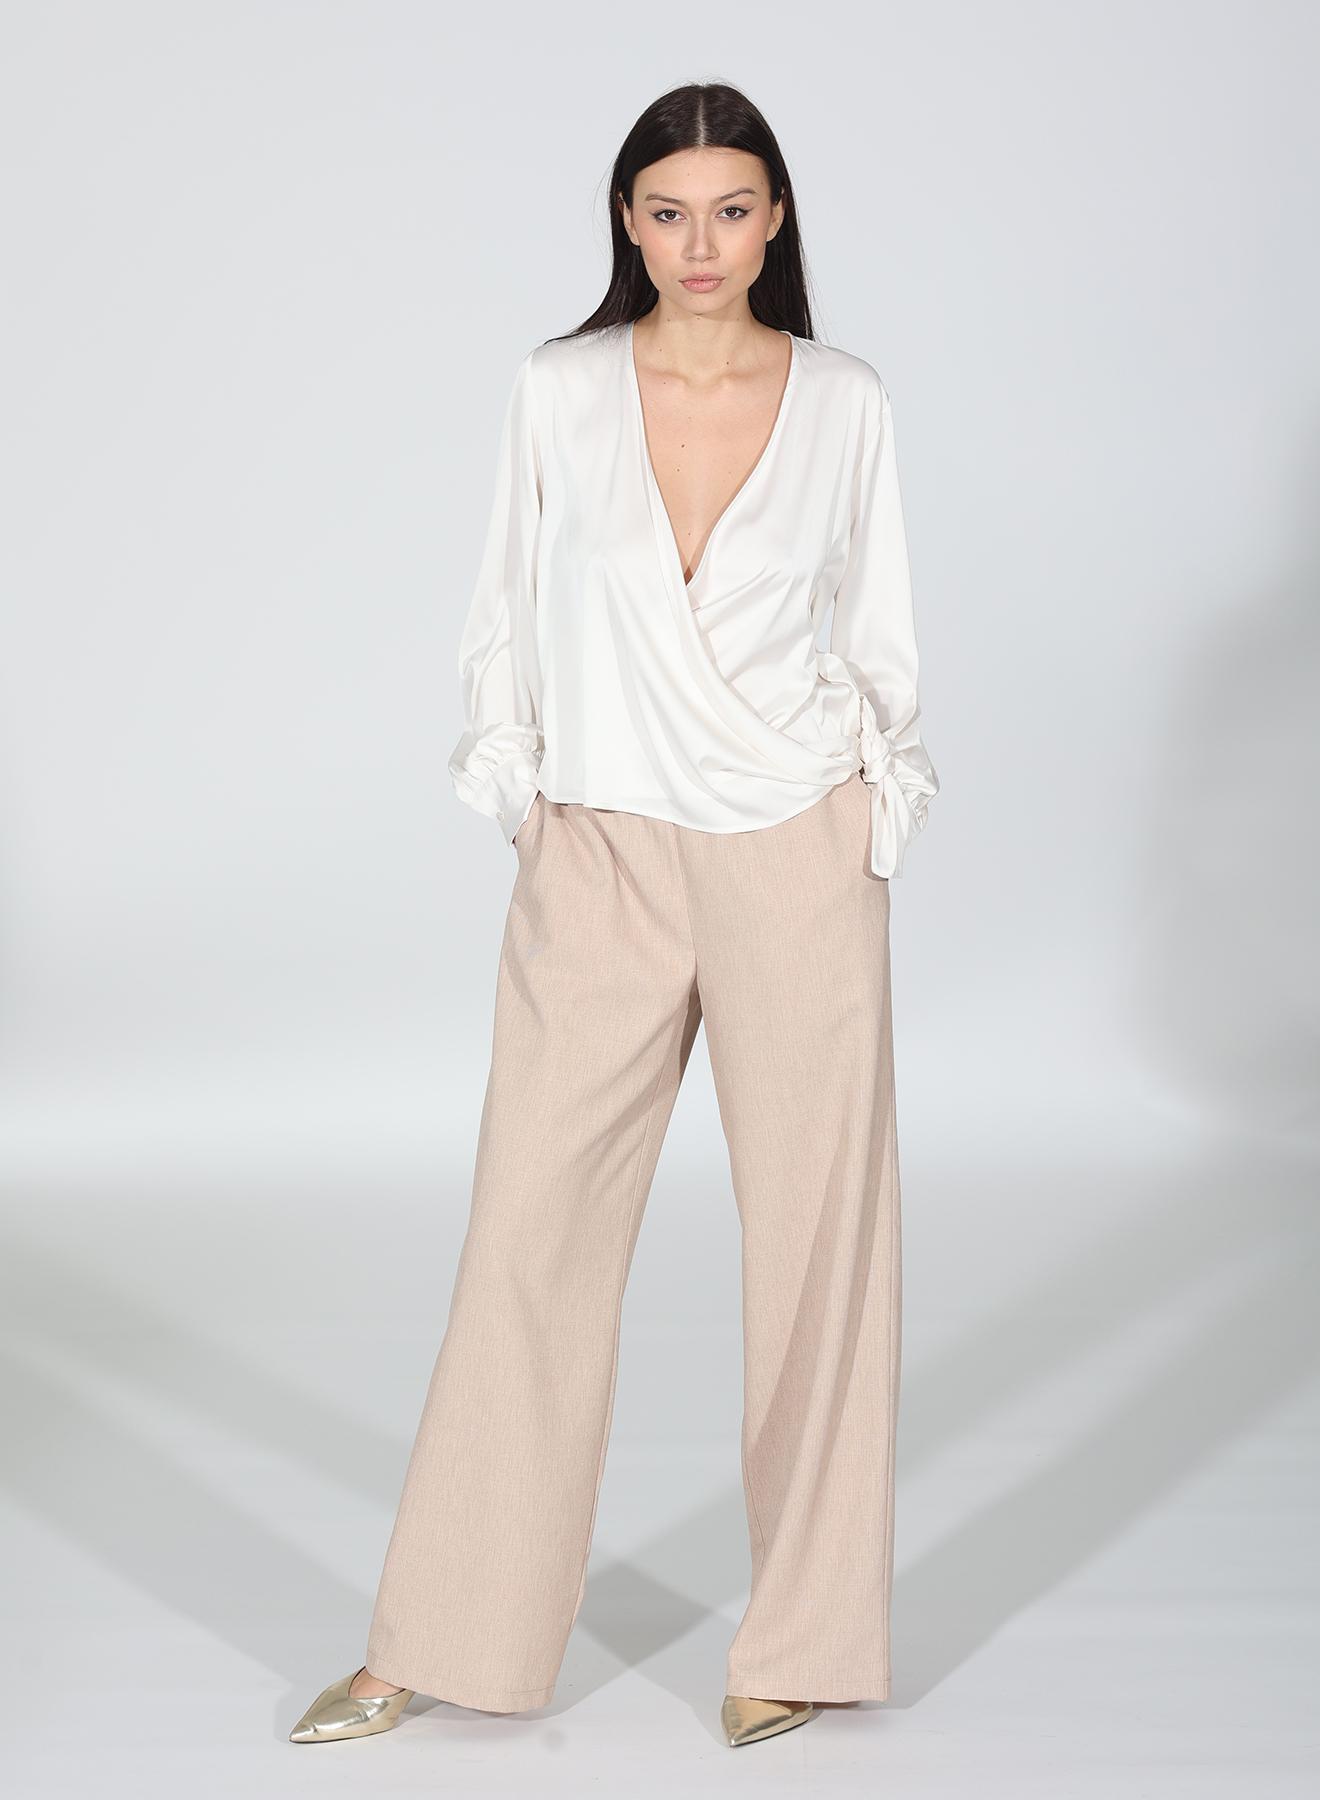 Beige wide legs Trousers with elastic waistband ties with cord R.R - 3